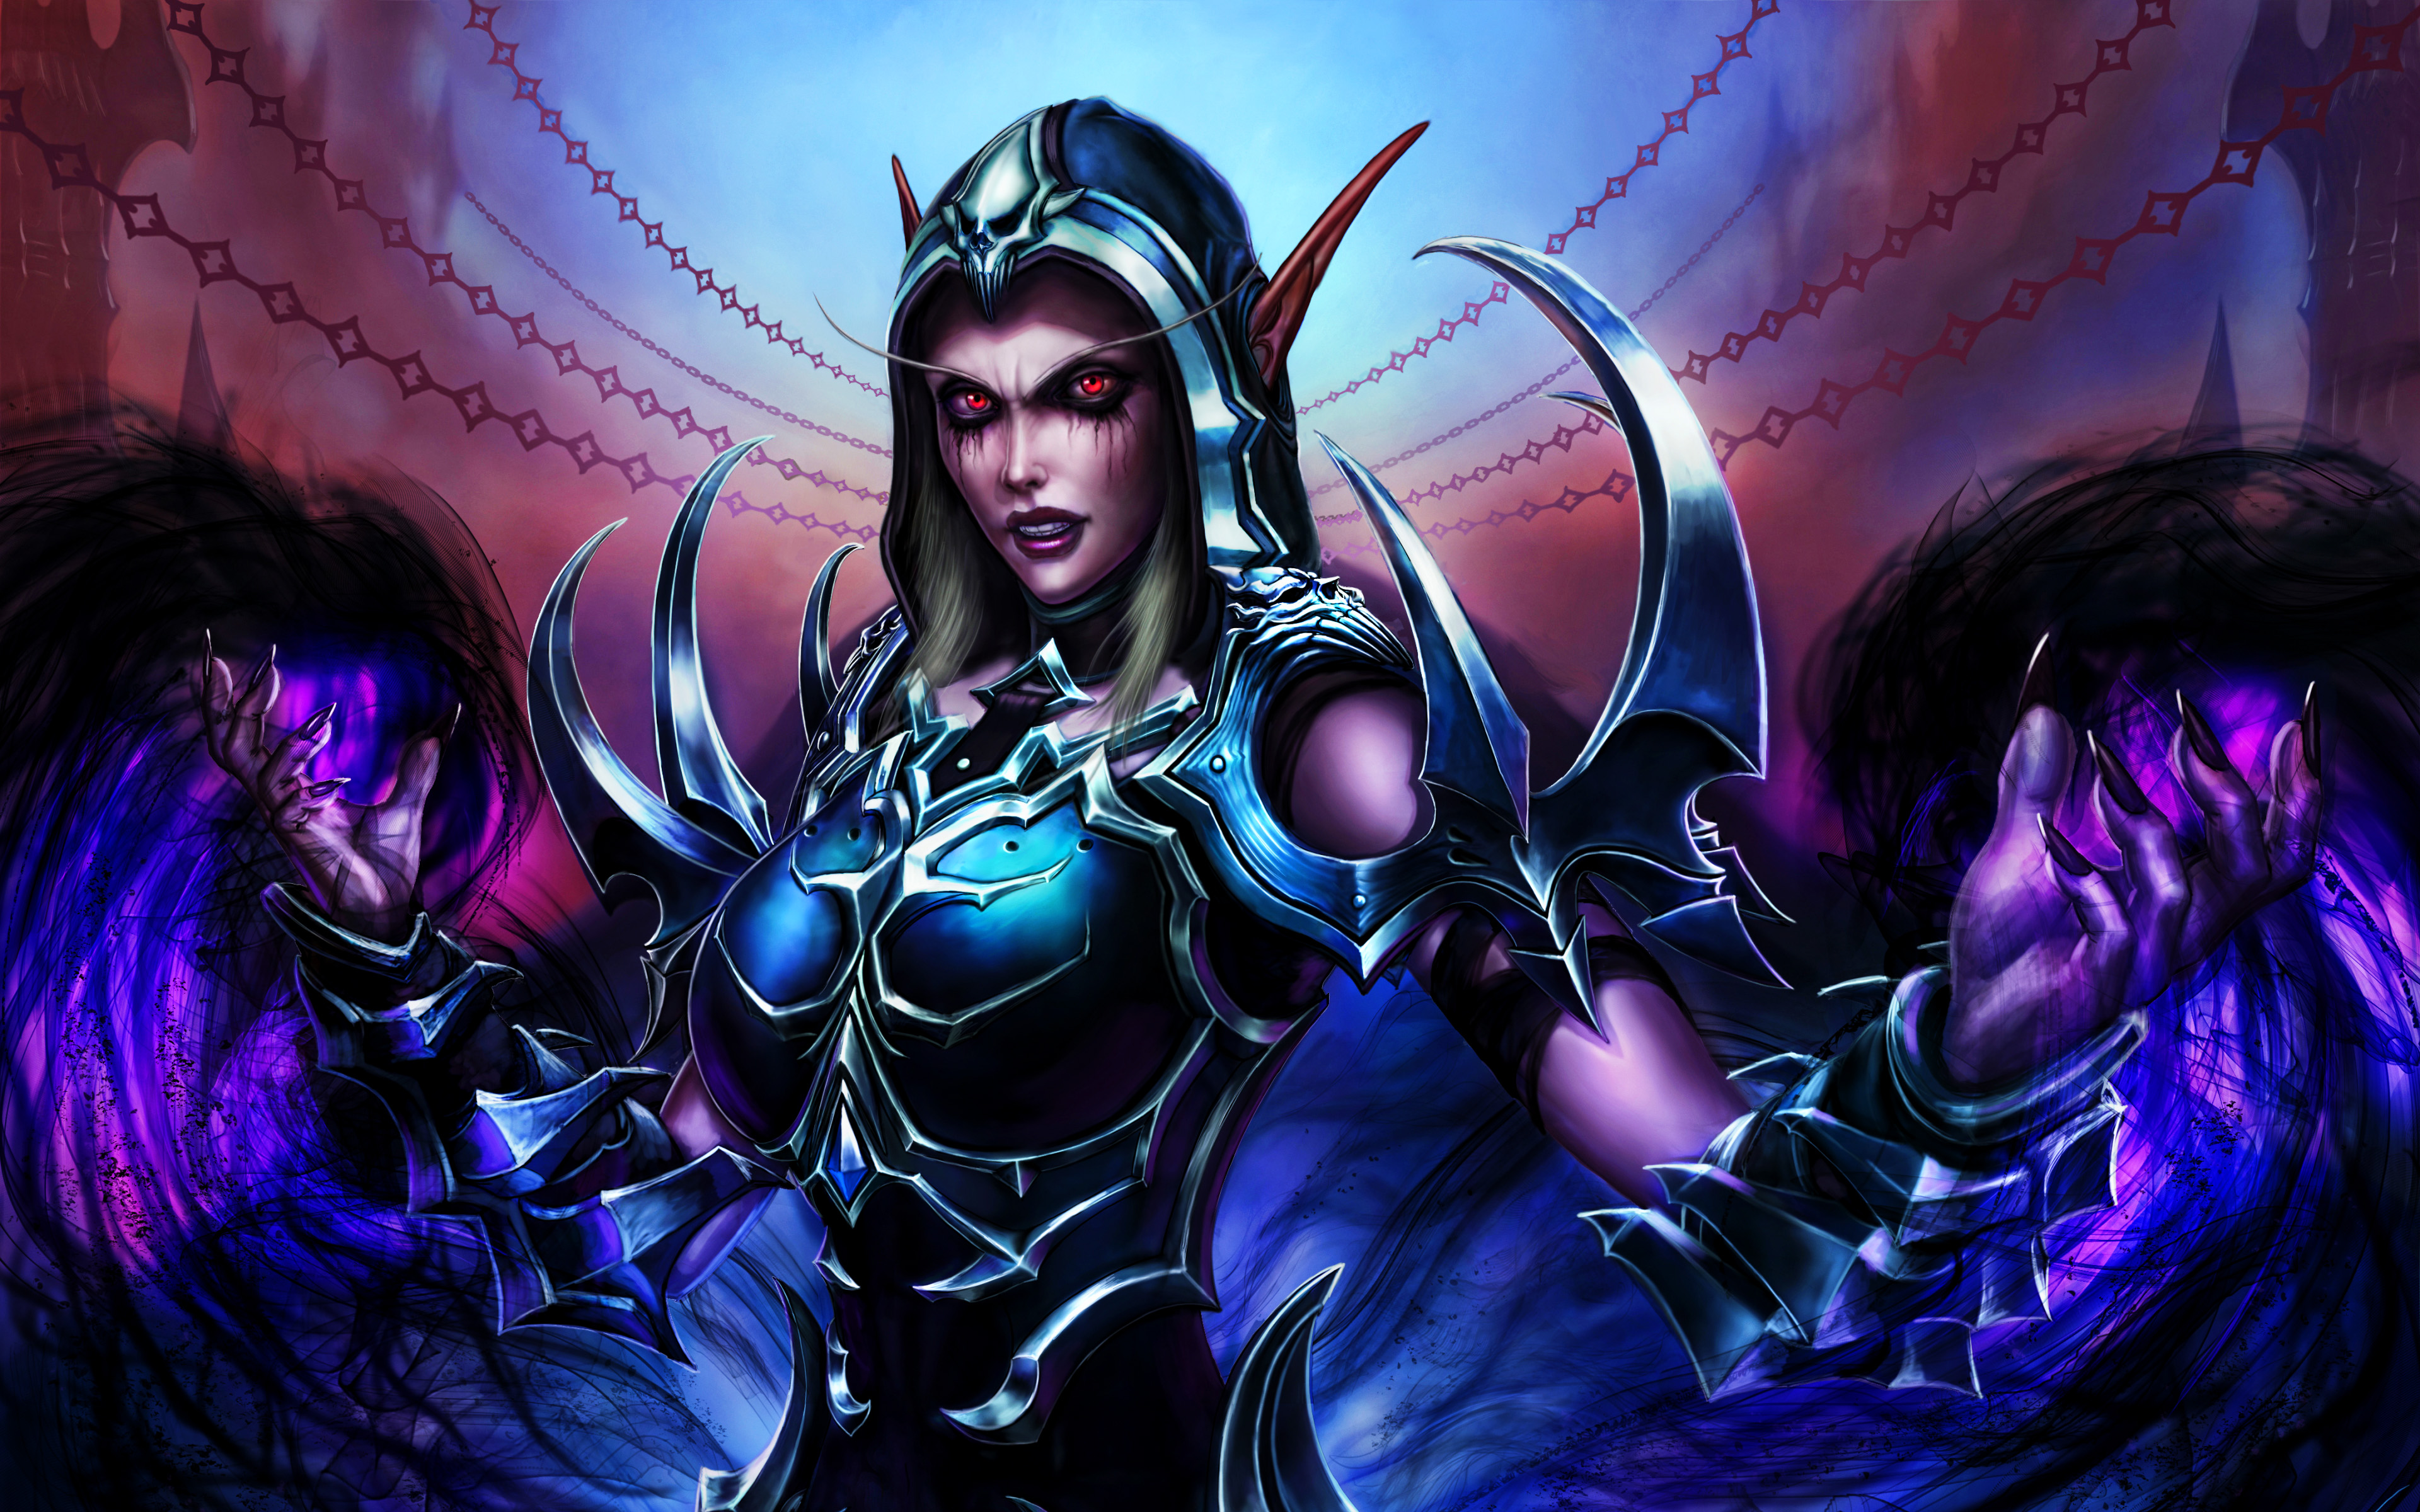 World Of Warcraft Shadowlands Wallpapers